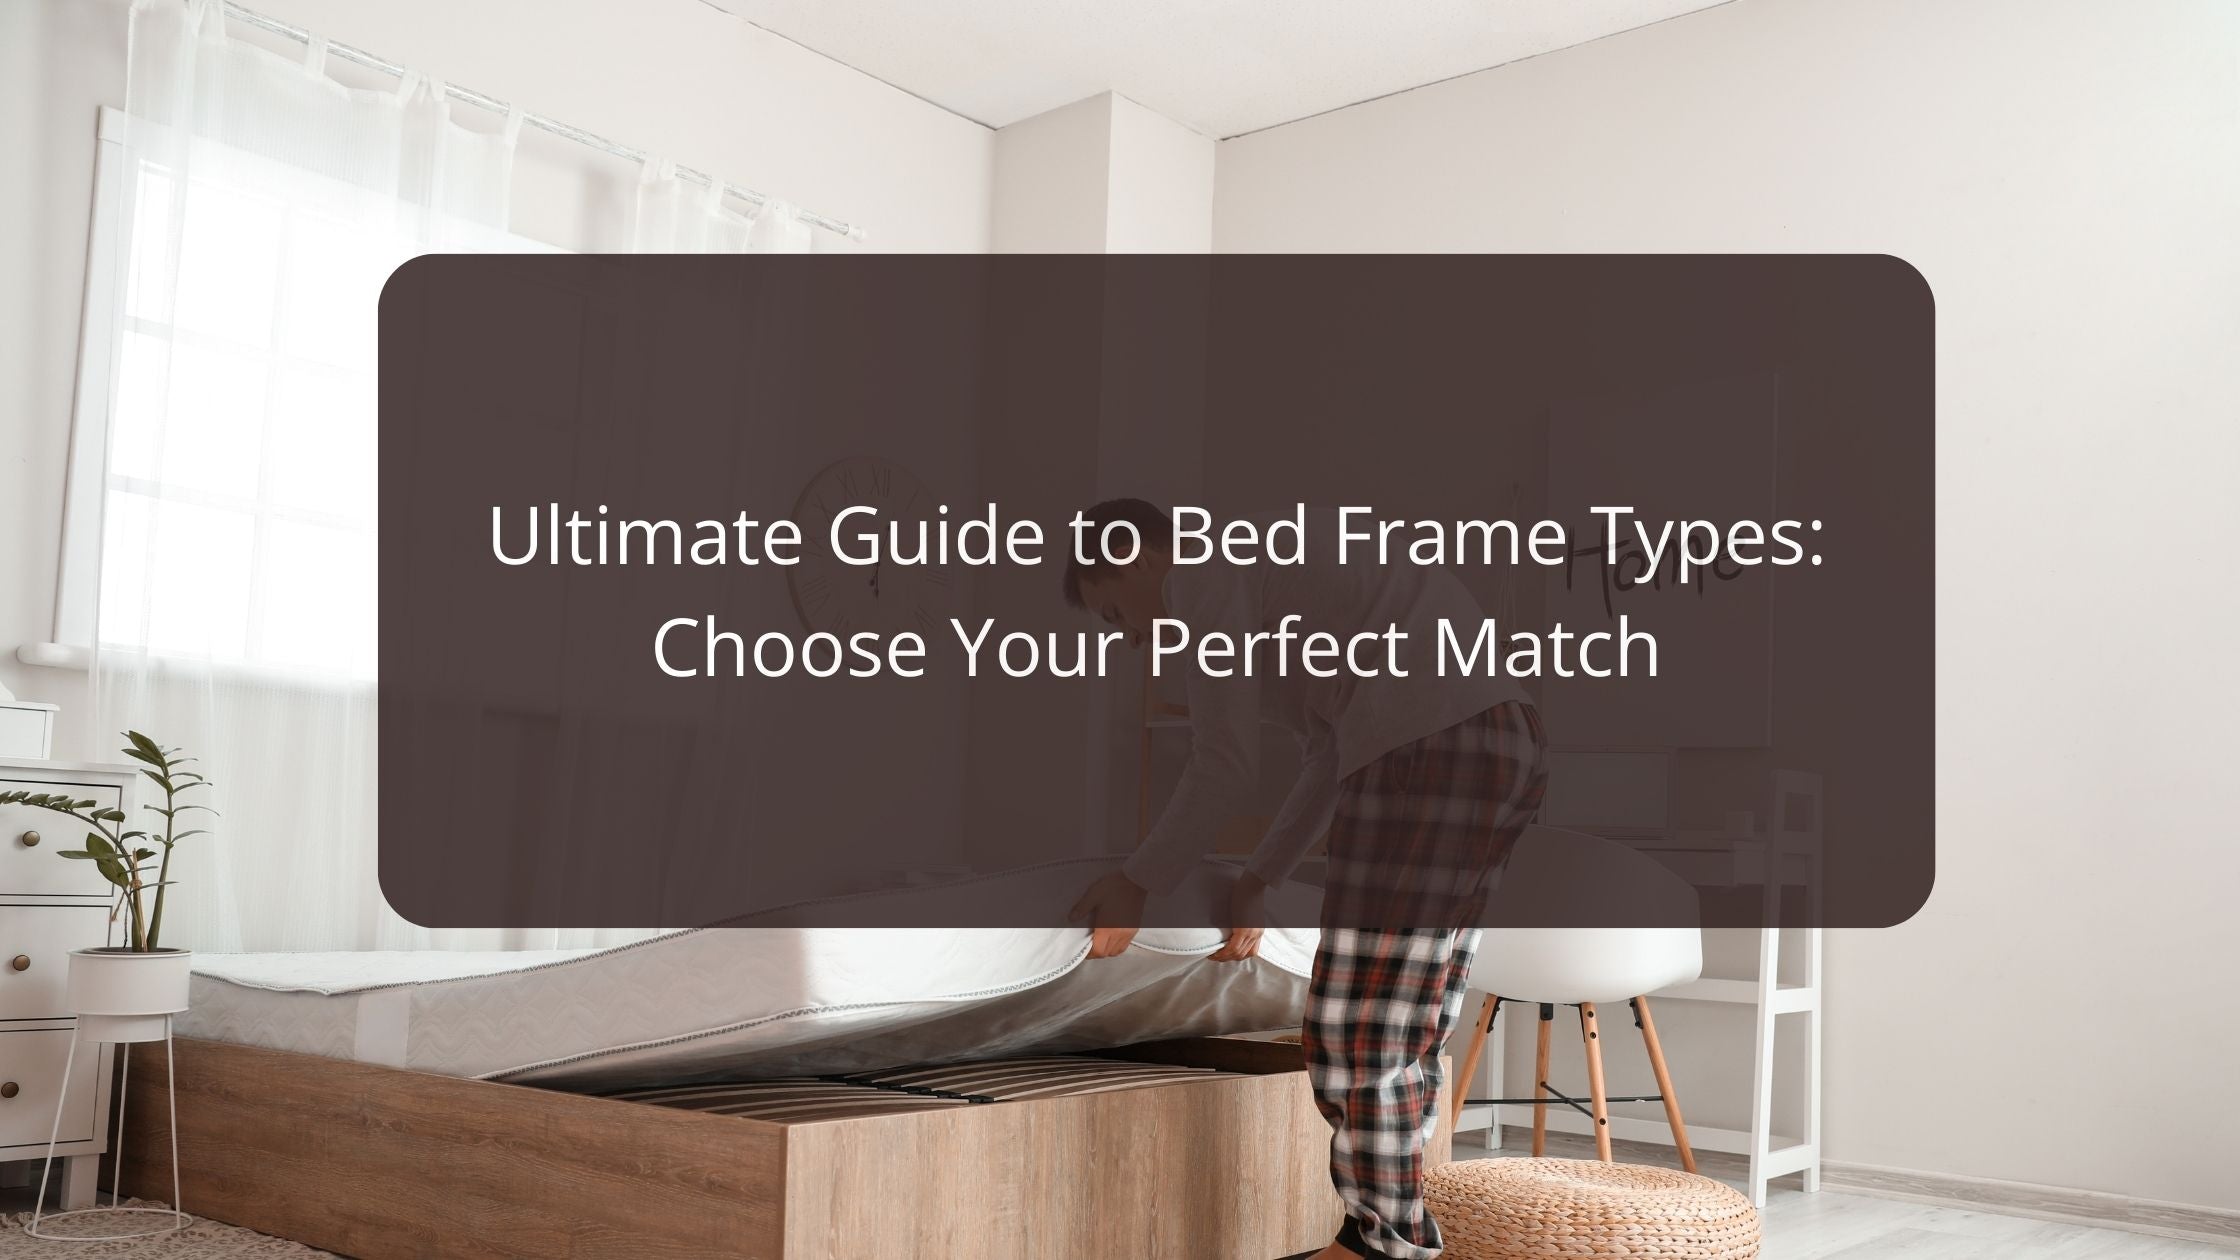 The Ultimate Guide to Bed Frame Types: Choose Your Perfect Match